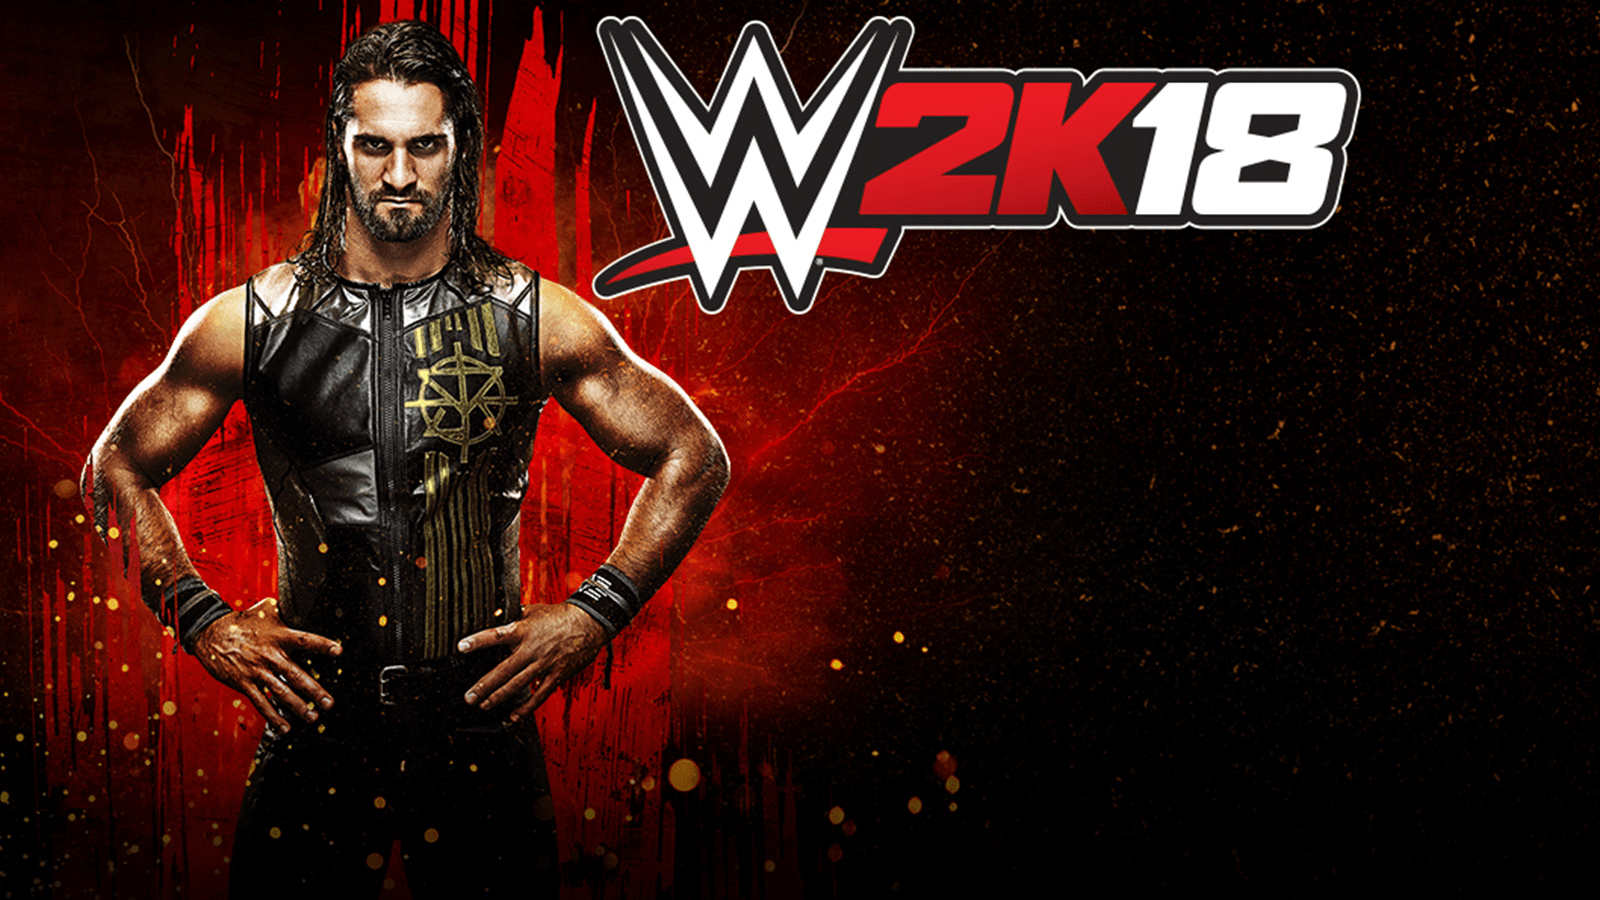 Wwe 2k18 game free download for windows 7